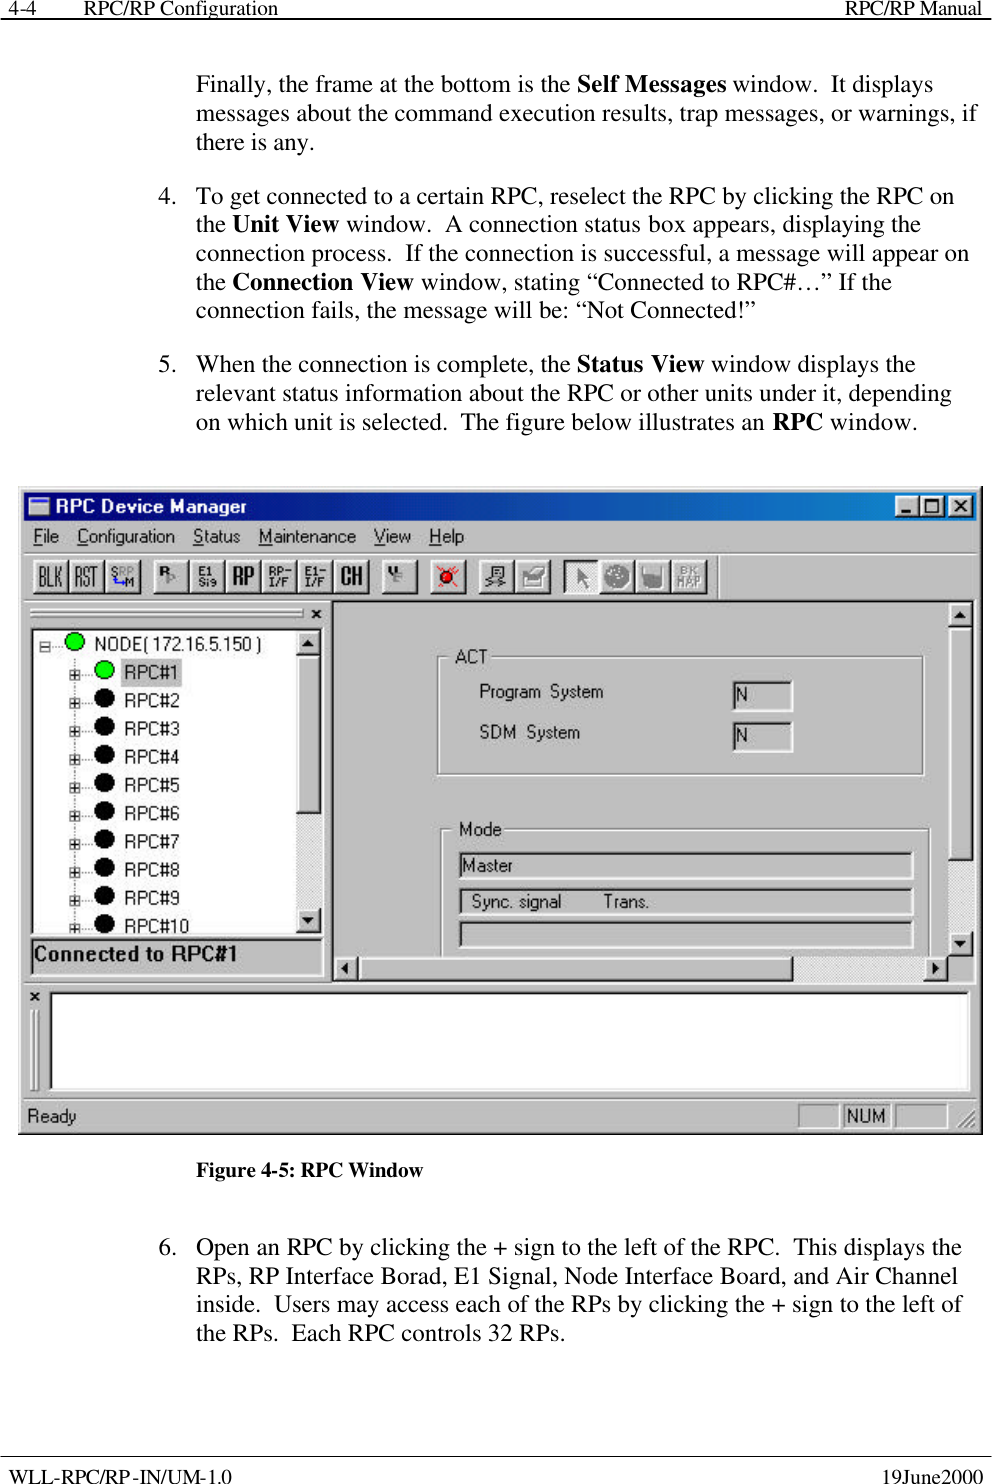  RPC/RP Configuration    RPC/RP Manual   WLL-RPC/RP-IN/UM-1.0    19June2000 4-4Finally, the frame at the bottom is the Self Messages window.  It displays messages about the command execution results, trap messages, or warnings, if there is any. 4.  To get connected to a certain RPC, reselect the RPC by clicking the RPC on the Unit View window.  A connection status box appears, displaying the connection process.  If the connection is successful, a message will appear on the Connection View window, stating “Connected to RPC#…” If the connection fails, the message will be: “Not Connected!” 5.  When the connection is complete, the Status View window displays the relevant status information about the RPC or other units under it, depending on which unit is selected.  The figure below illustrates an RPC window.  Figure 4-5: RPC Window 6.  Open an RPC by clicking the + sign to the left of the RPC.  This displays the RPs, RP Interface Borad, E1 Signal, Node Interface Board, and Air Channel inside.  Users may access each of the RPs by clicking the + sign to the left of the RPs.  Each RPC controls 32 RPs.  